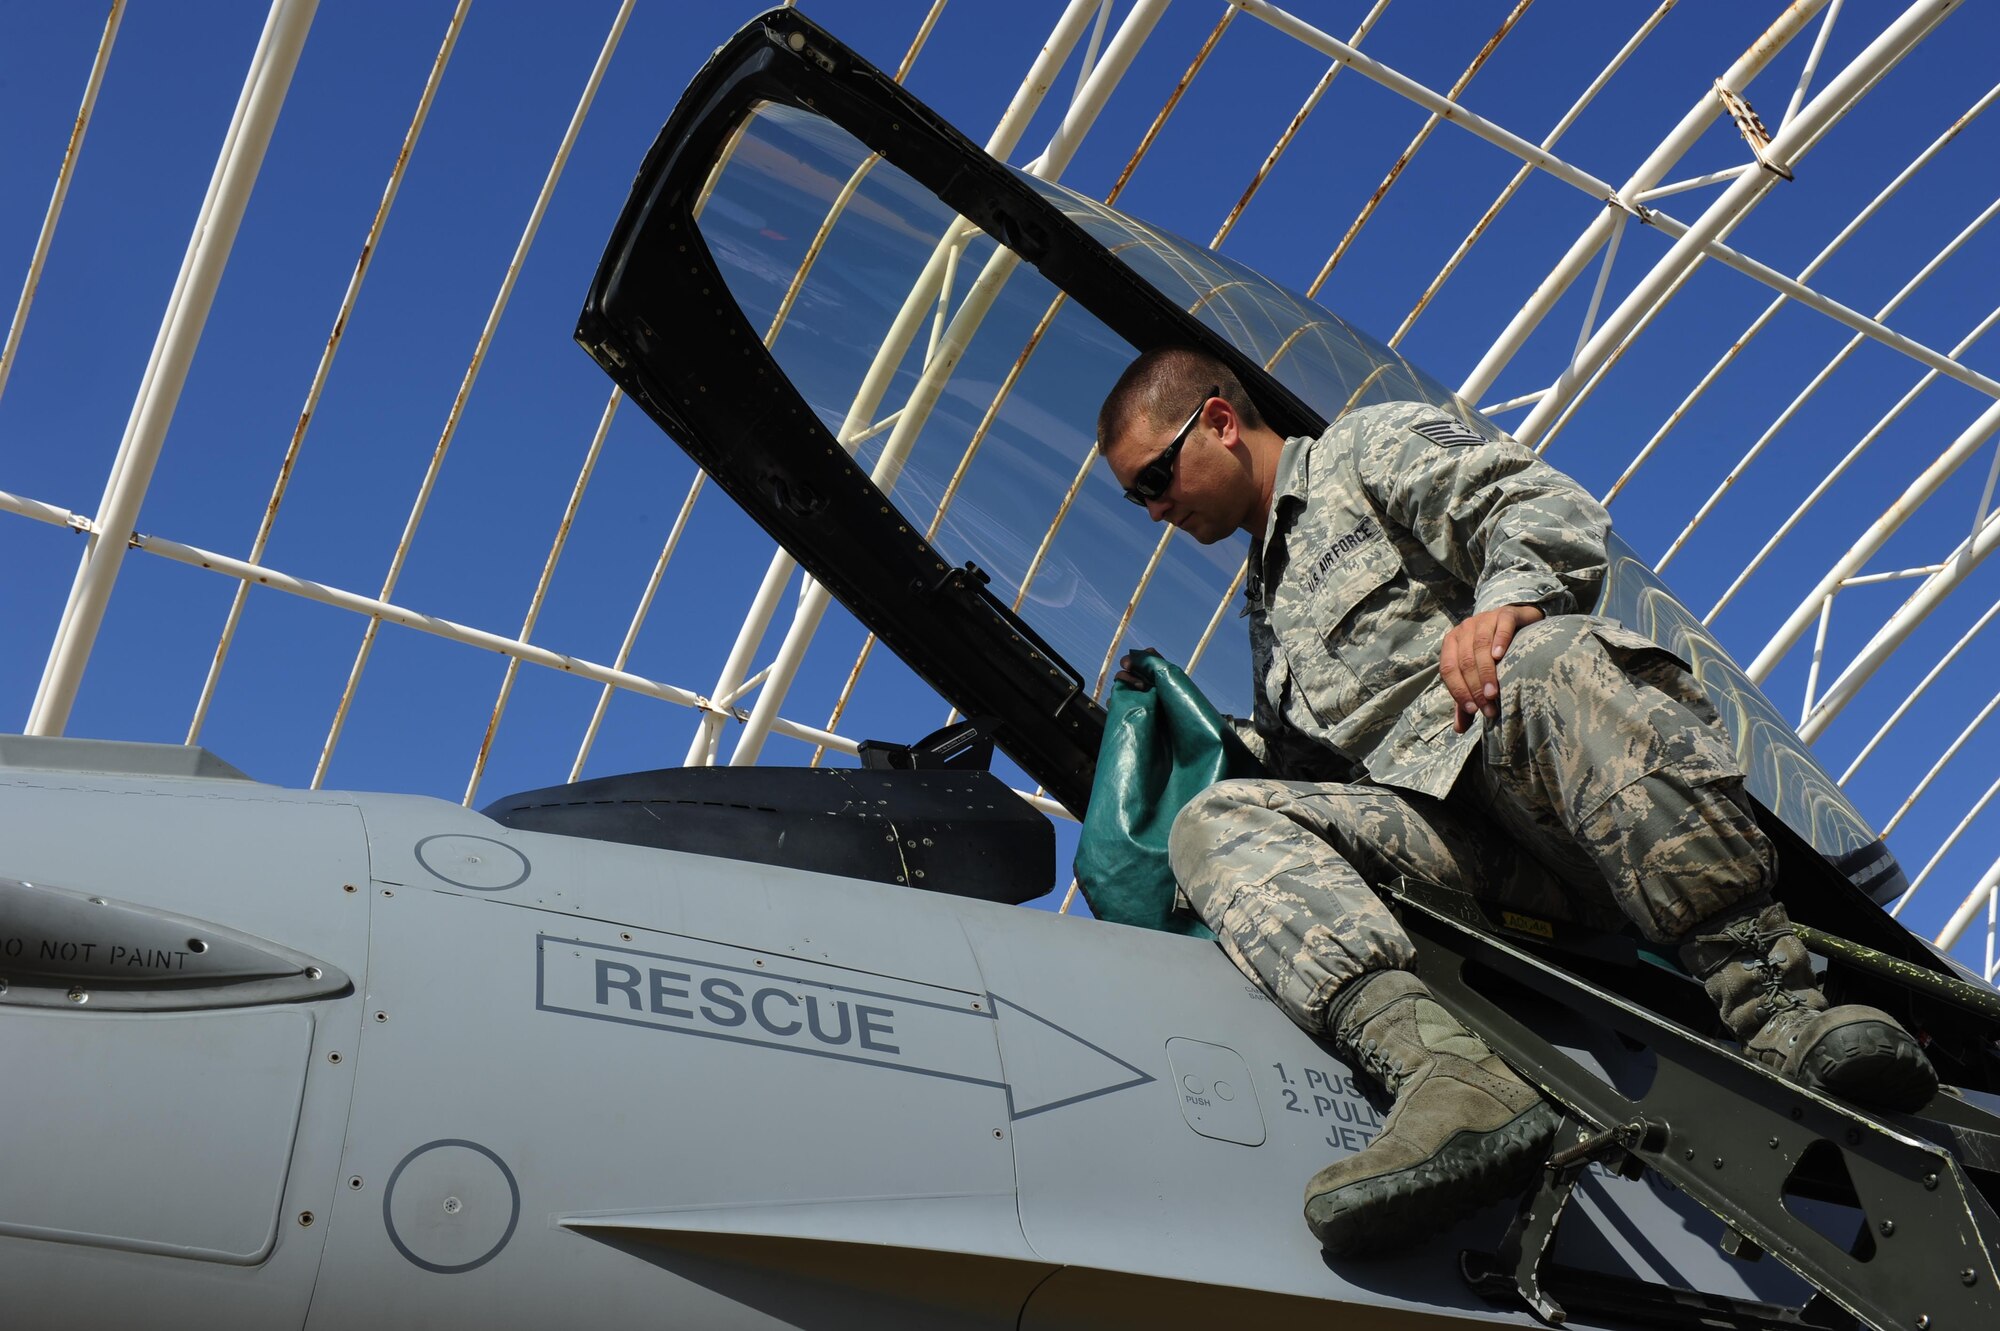 U.S. Air Force Tech. Sgt. Brett Larson, 134th Expeditionary Fighter Squadron F-16 Fighting Falcon crew chief, Vermont Air National Guard, inspects the cockpit of an F-16 at Kunsan Air Base, Republic of Korea, Oct. 6, 2015. The 134th EFS was redeployed from Kadena Air Base, Japan to Kunsan AB as part of a theater security package. The deployment of rotational fighters throughout the Pacific provides unique opportunities to integrate various forces into joint, coalition, and bilateral training across diverse environments. (U.S. Air Force photo by Staff Sgt. Nick Wilson/Released) 